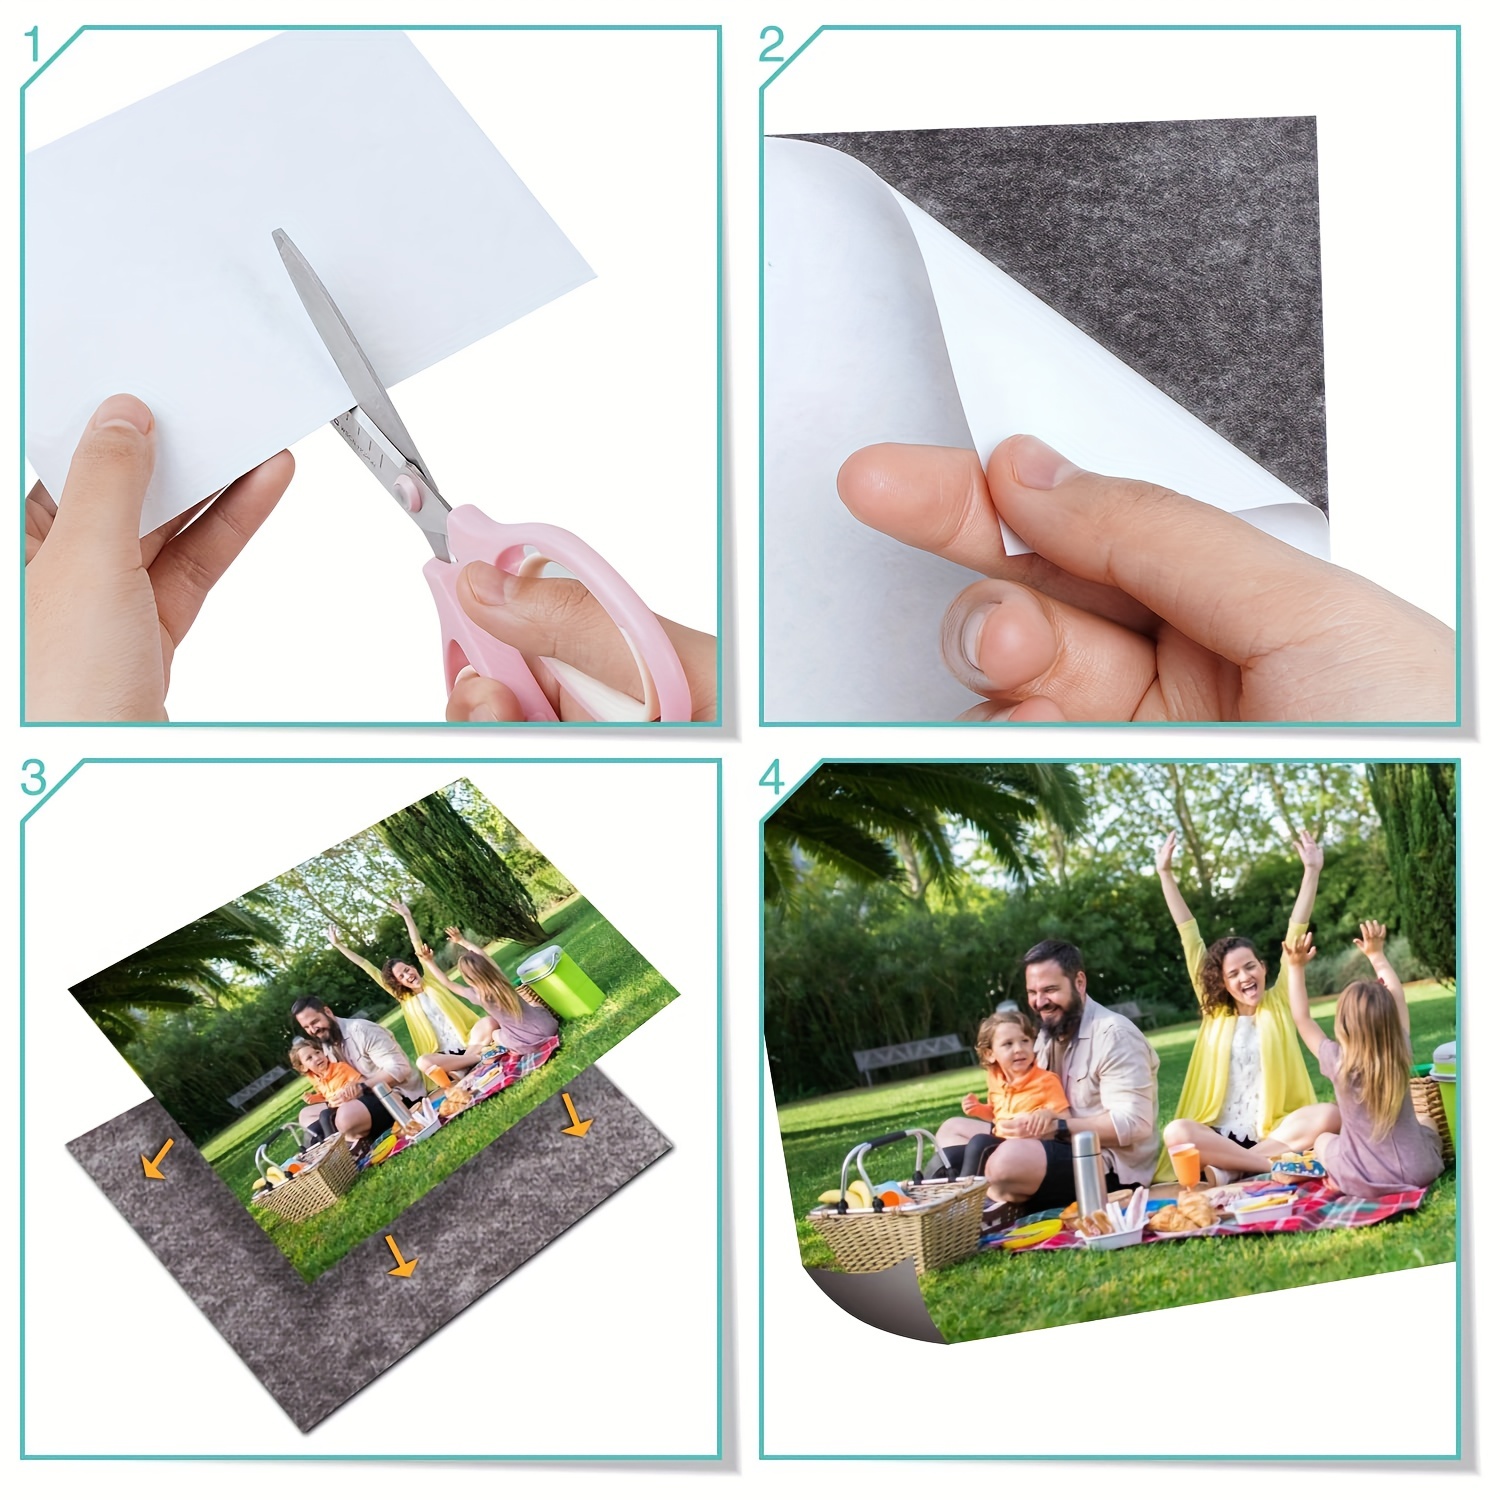 Magnetic Sheets with Adhesive Backing - 5 Pcs Each 4 inch x 6 inch - Peel and Stick Magnetic Paper for Photo and Picture Magnets - Flexible Magnet